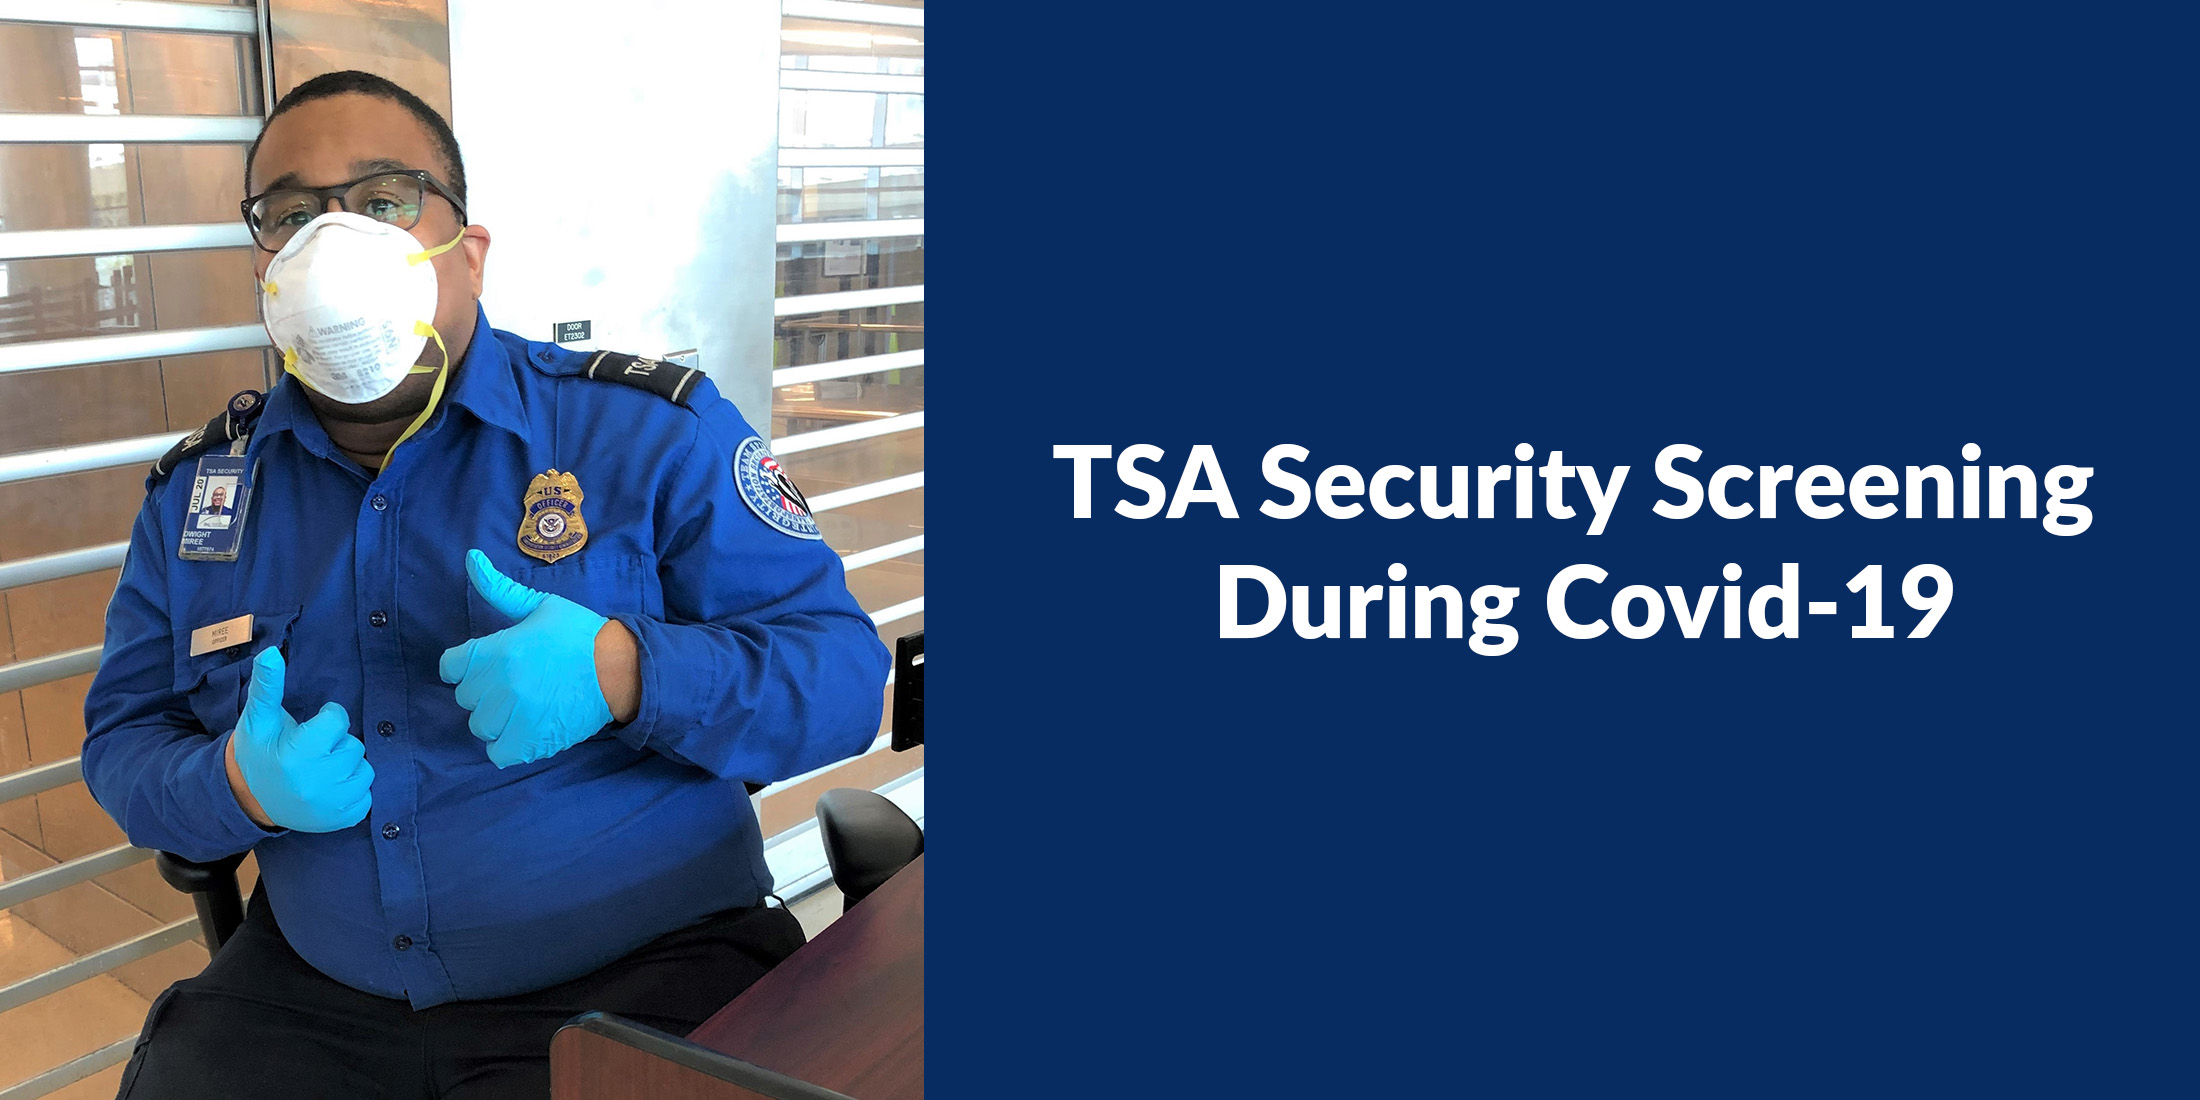 Travelers Can Expect New Procedures at TSA Security Screening